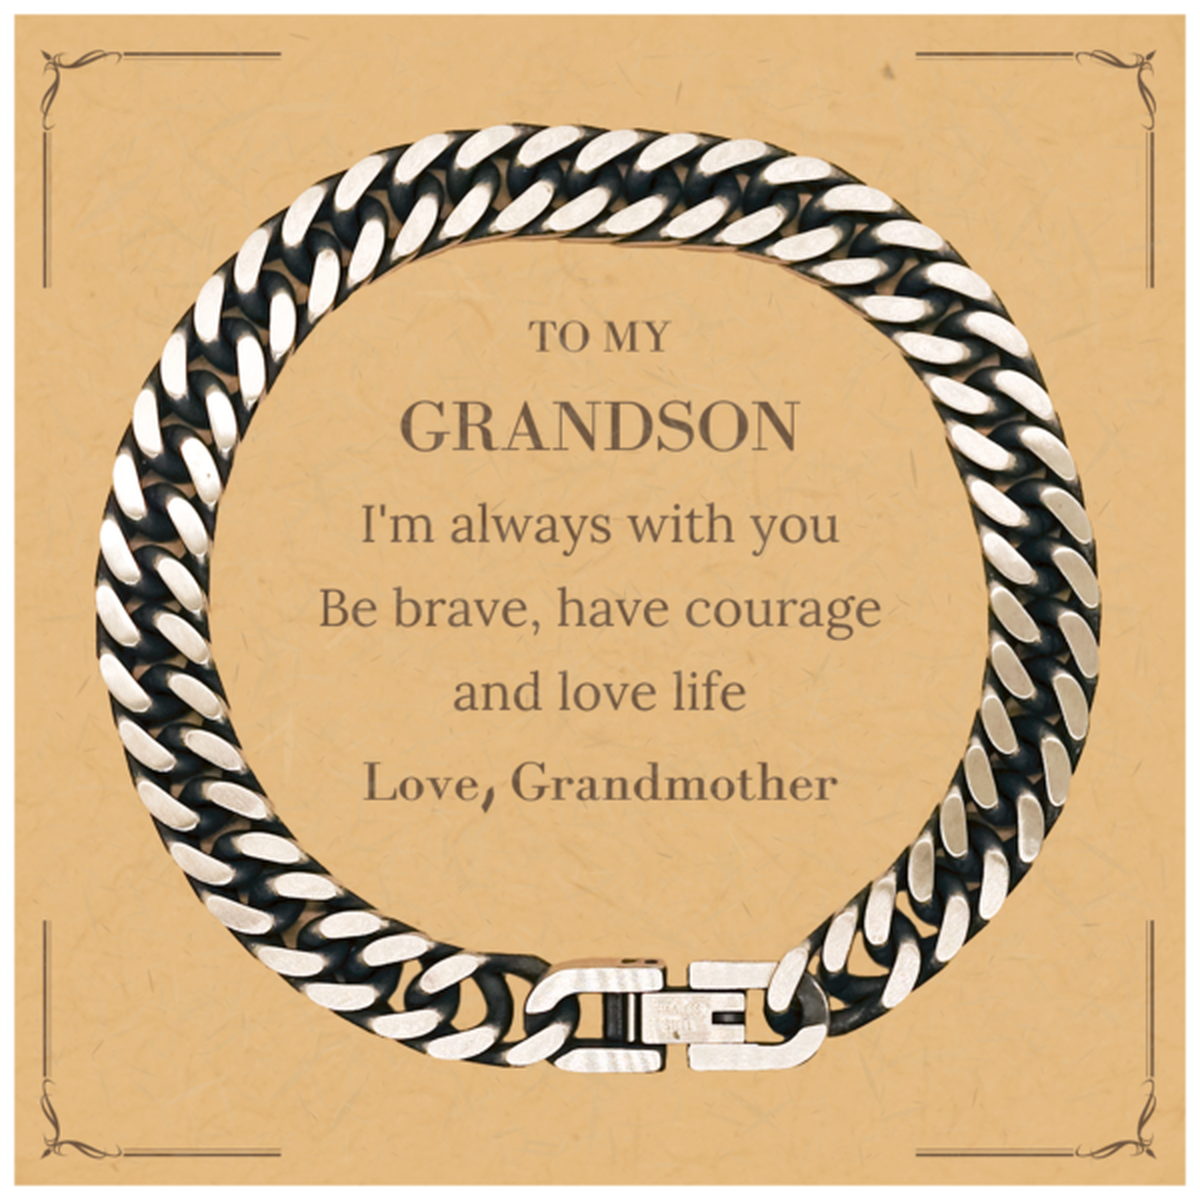 To My Grandson Gifts from Grandmother, Unique Cuban Link Chain Bracelet Inspirational Christmas Birthday Graduation Gifts for Grandson I'm always with you. Be brave, have courage and love life. Love, Grandmother